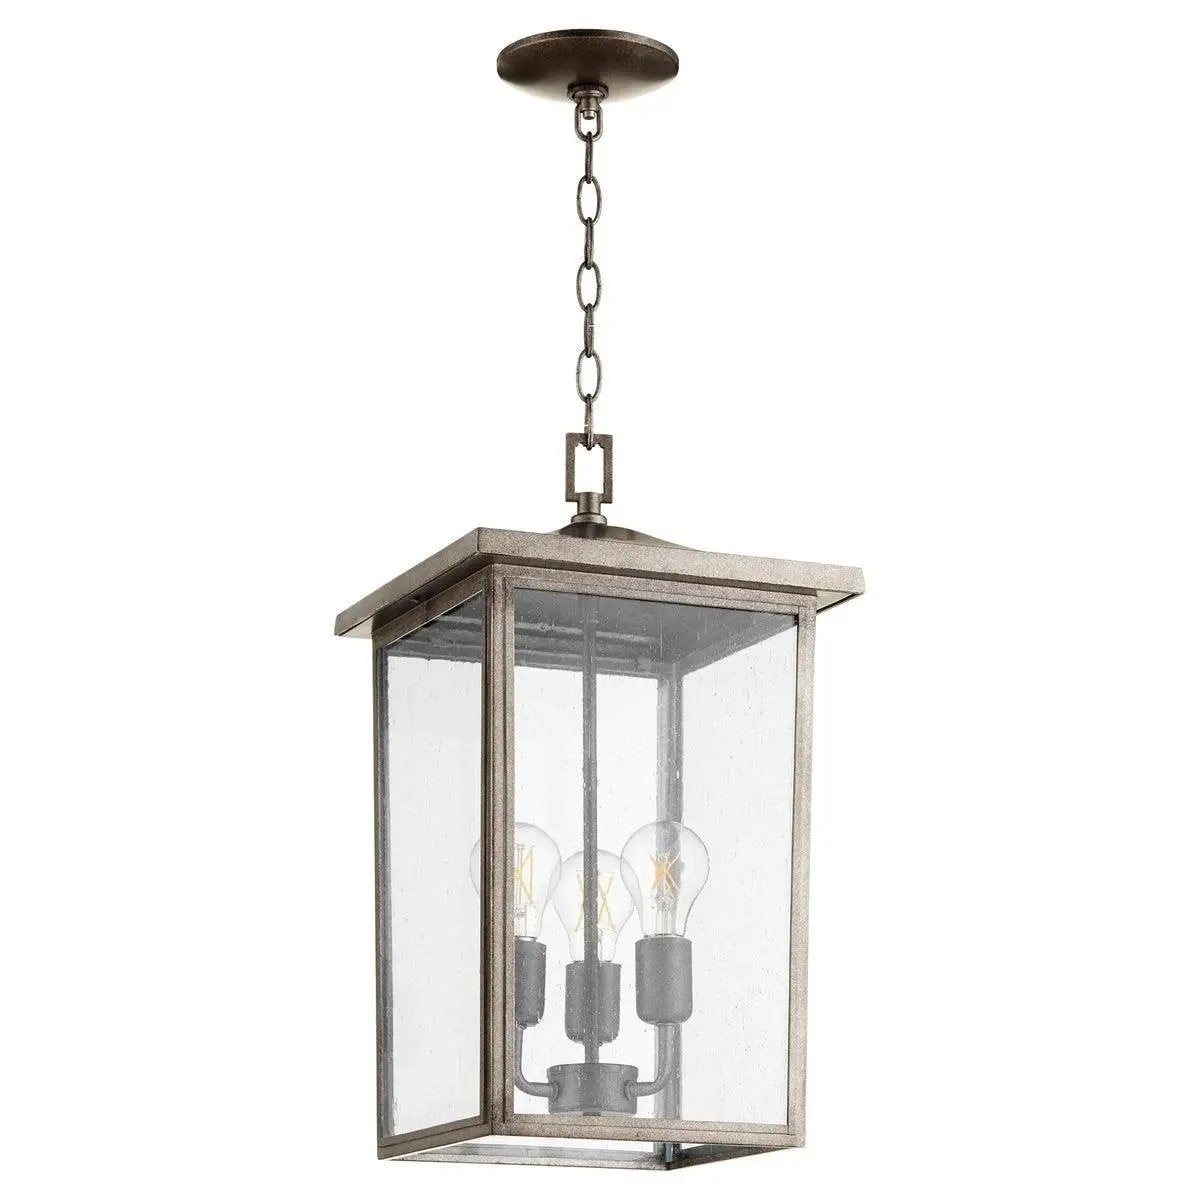 A black farmhouse outdoor hanging lantern with a glass cover, featuring three 60W medium base light sources. Provides a warm ambient glow for your covered porch or patio.